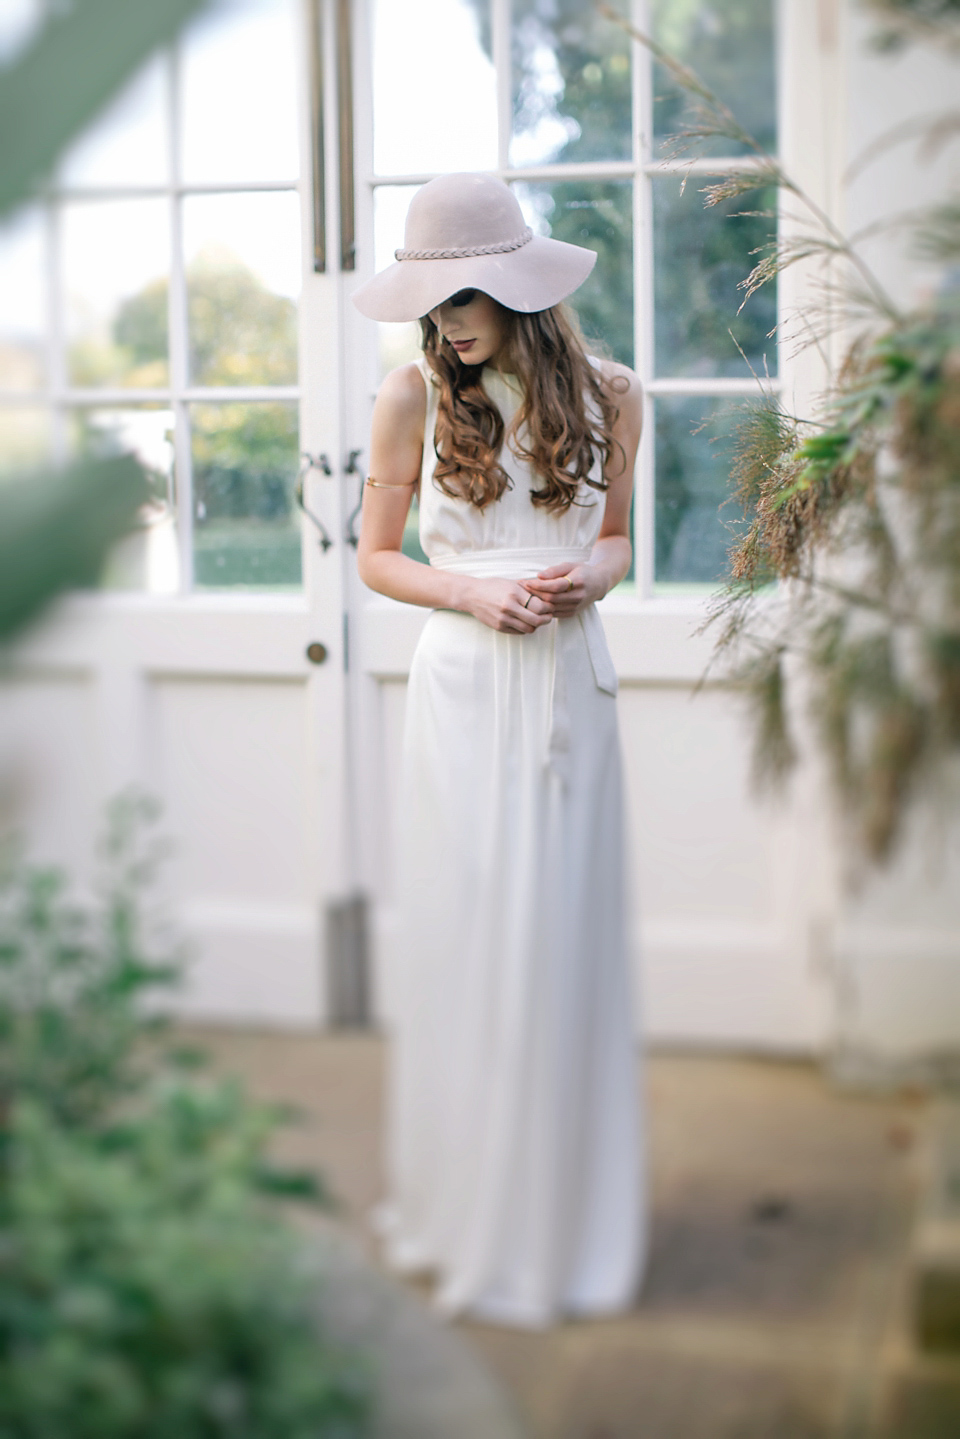 Beautiful 70's inspiration for the stylish modern bride. Styling by Cicily bridal using Halfpenny London and Charlie Brear gowns. Accessories by Debbie Carlisle. Photography by Jess Petrie.